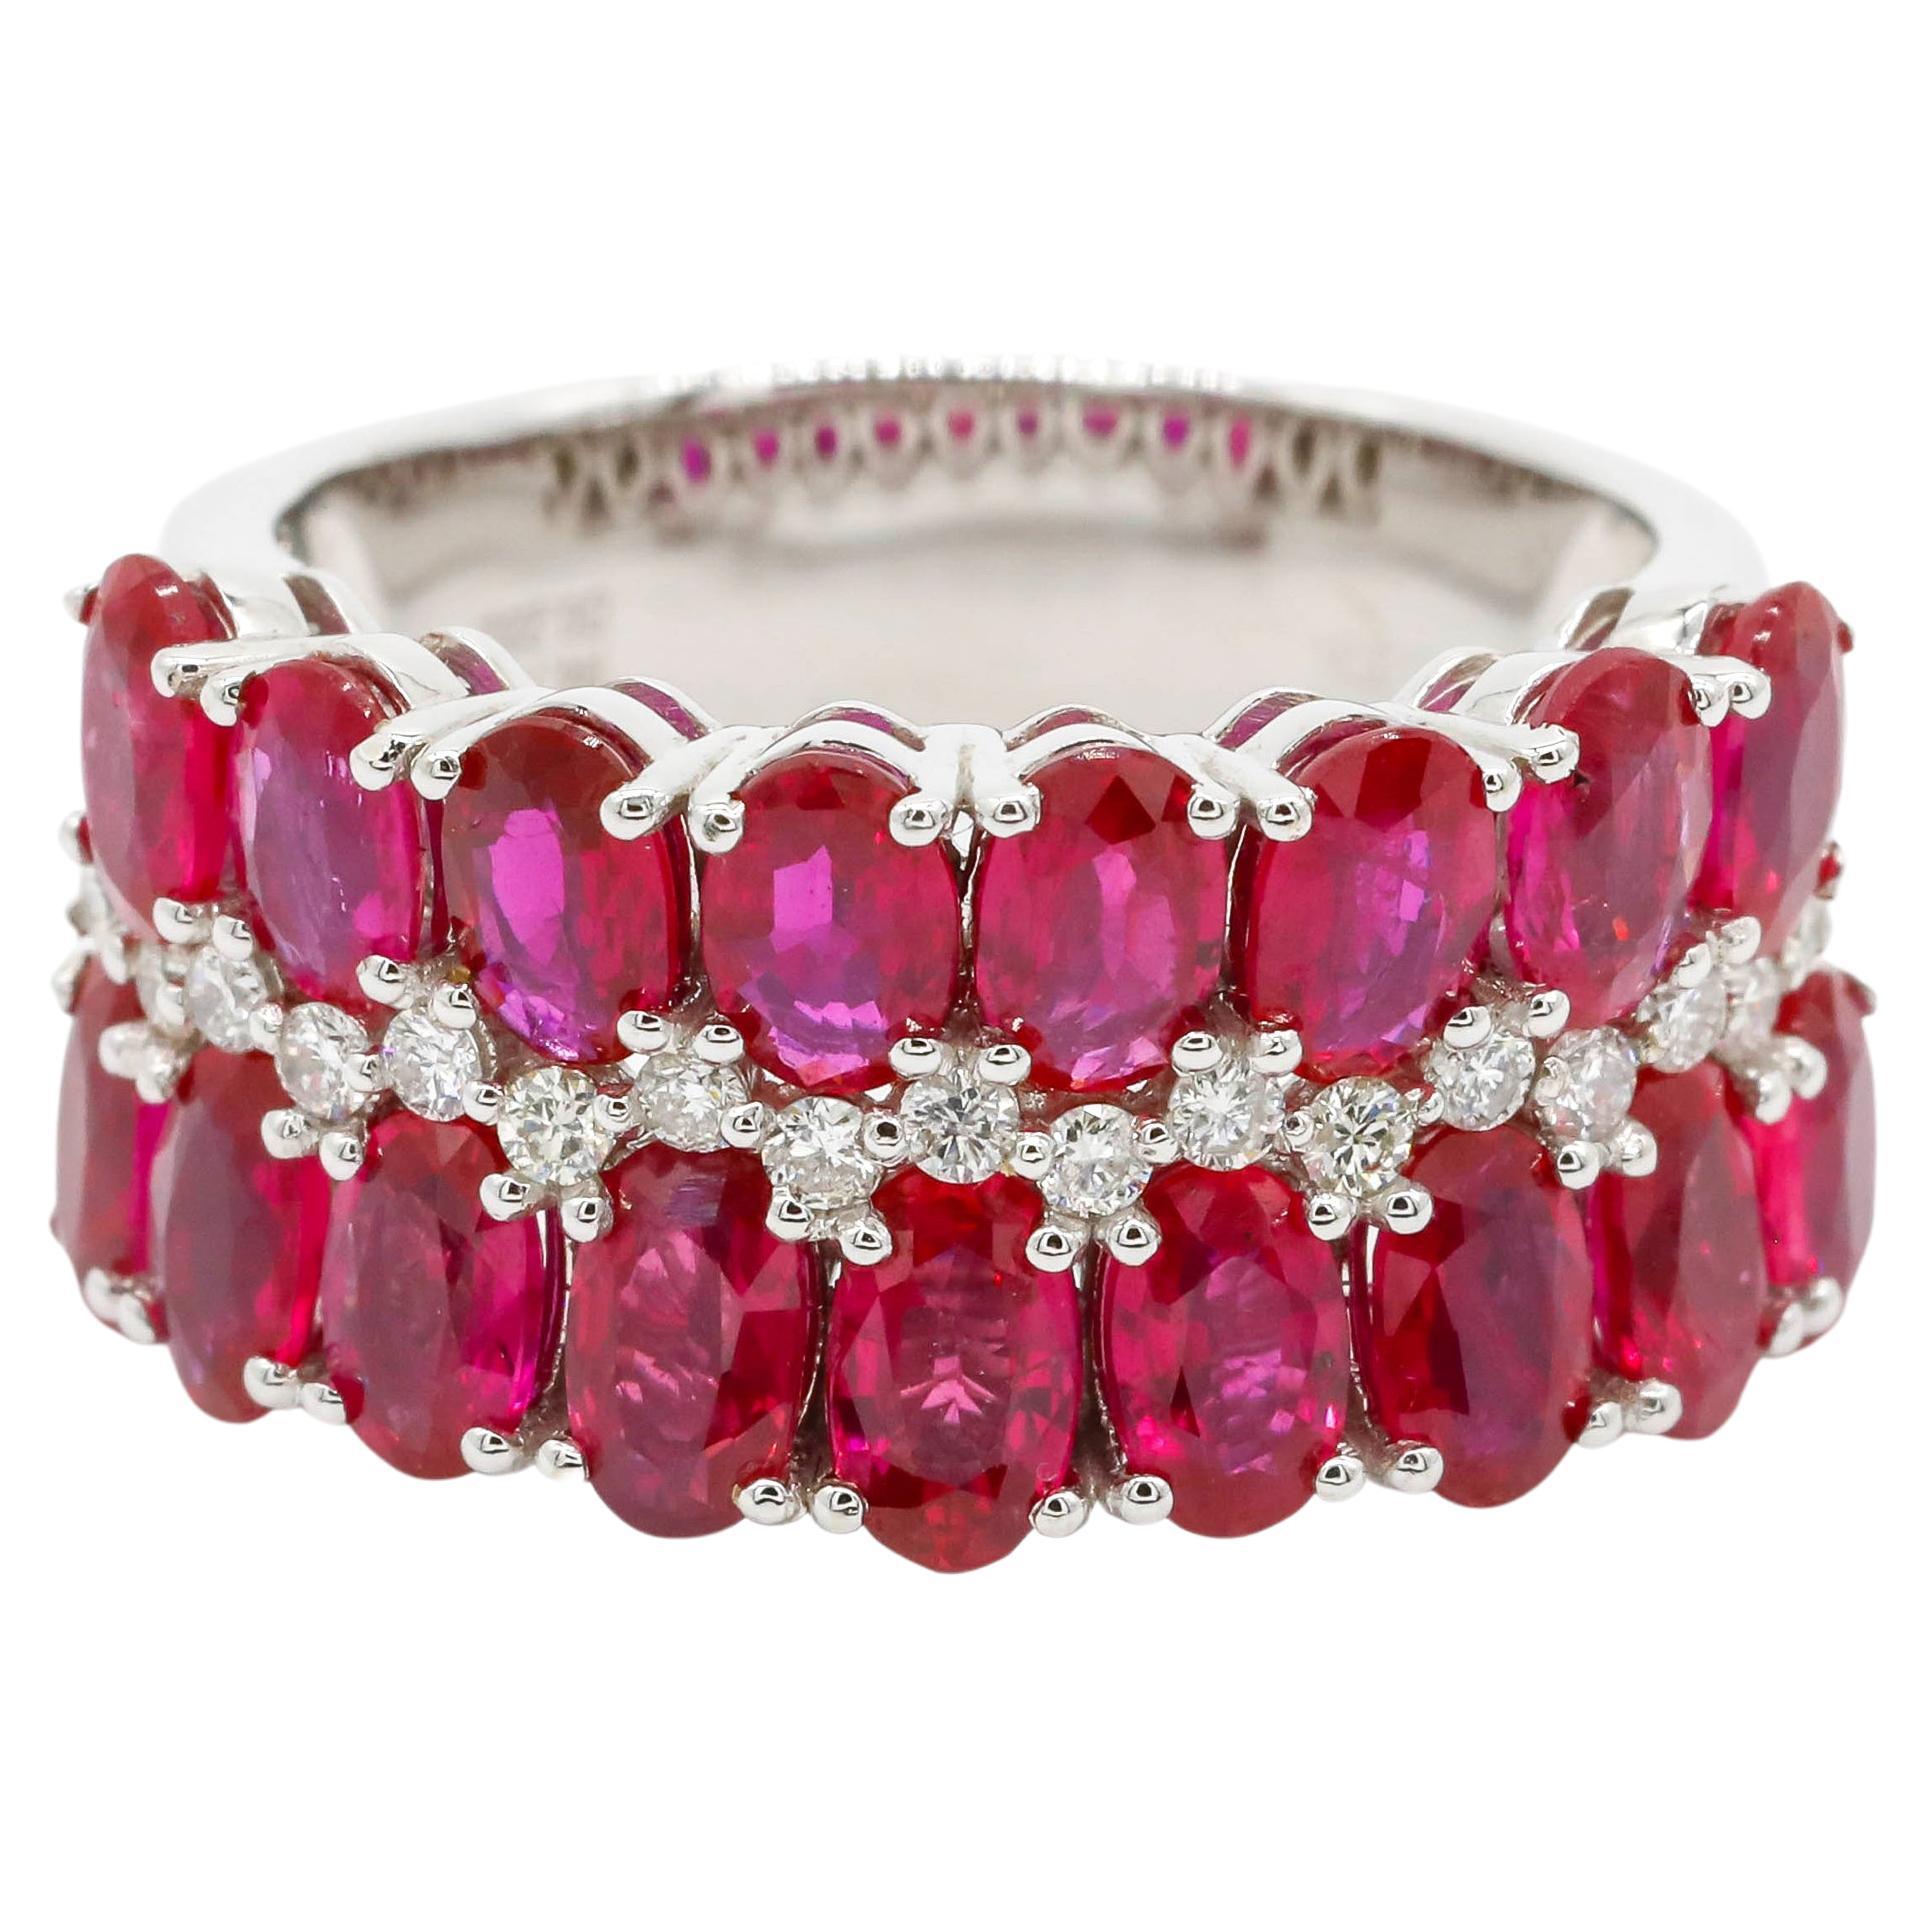 4.75 Carat Oval Cut Ruby and 0.22 Carat Diamond Pave 18K White Gold Cluster Ring